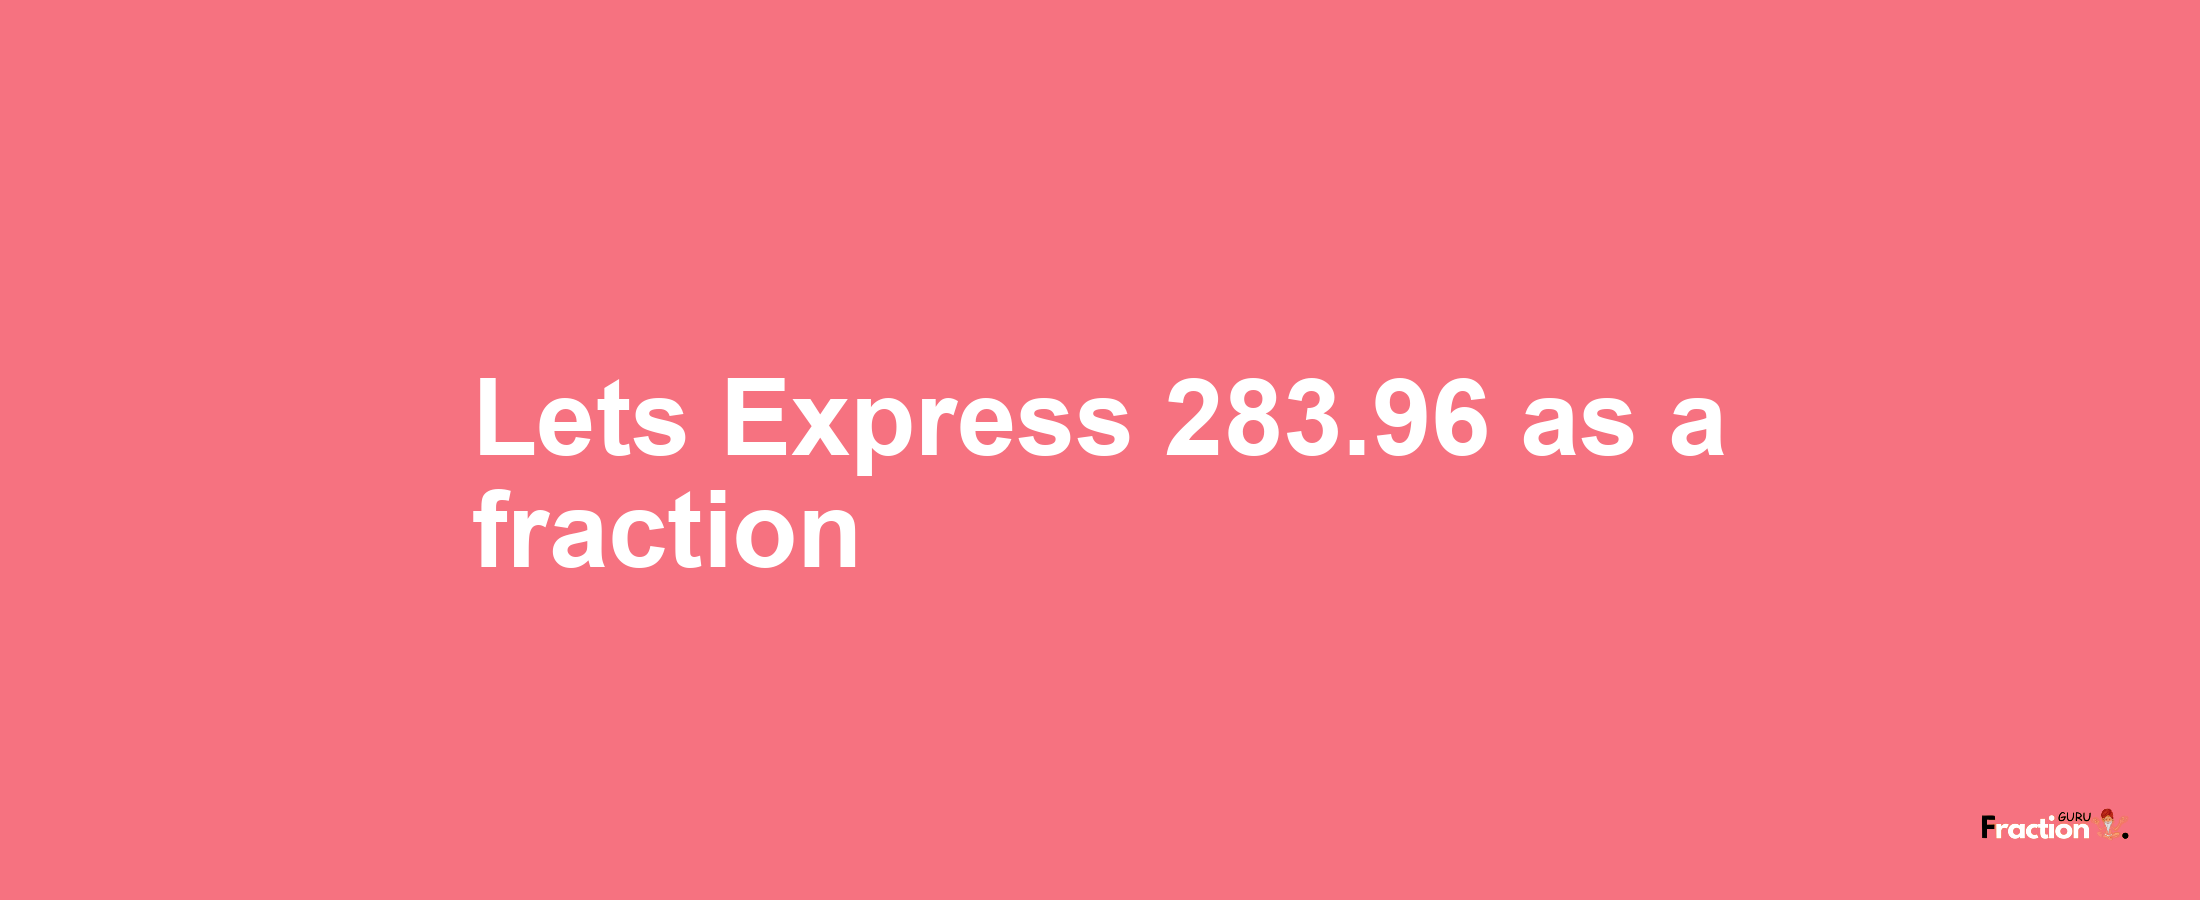 Lets Express 283.96 as afraction